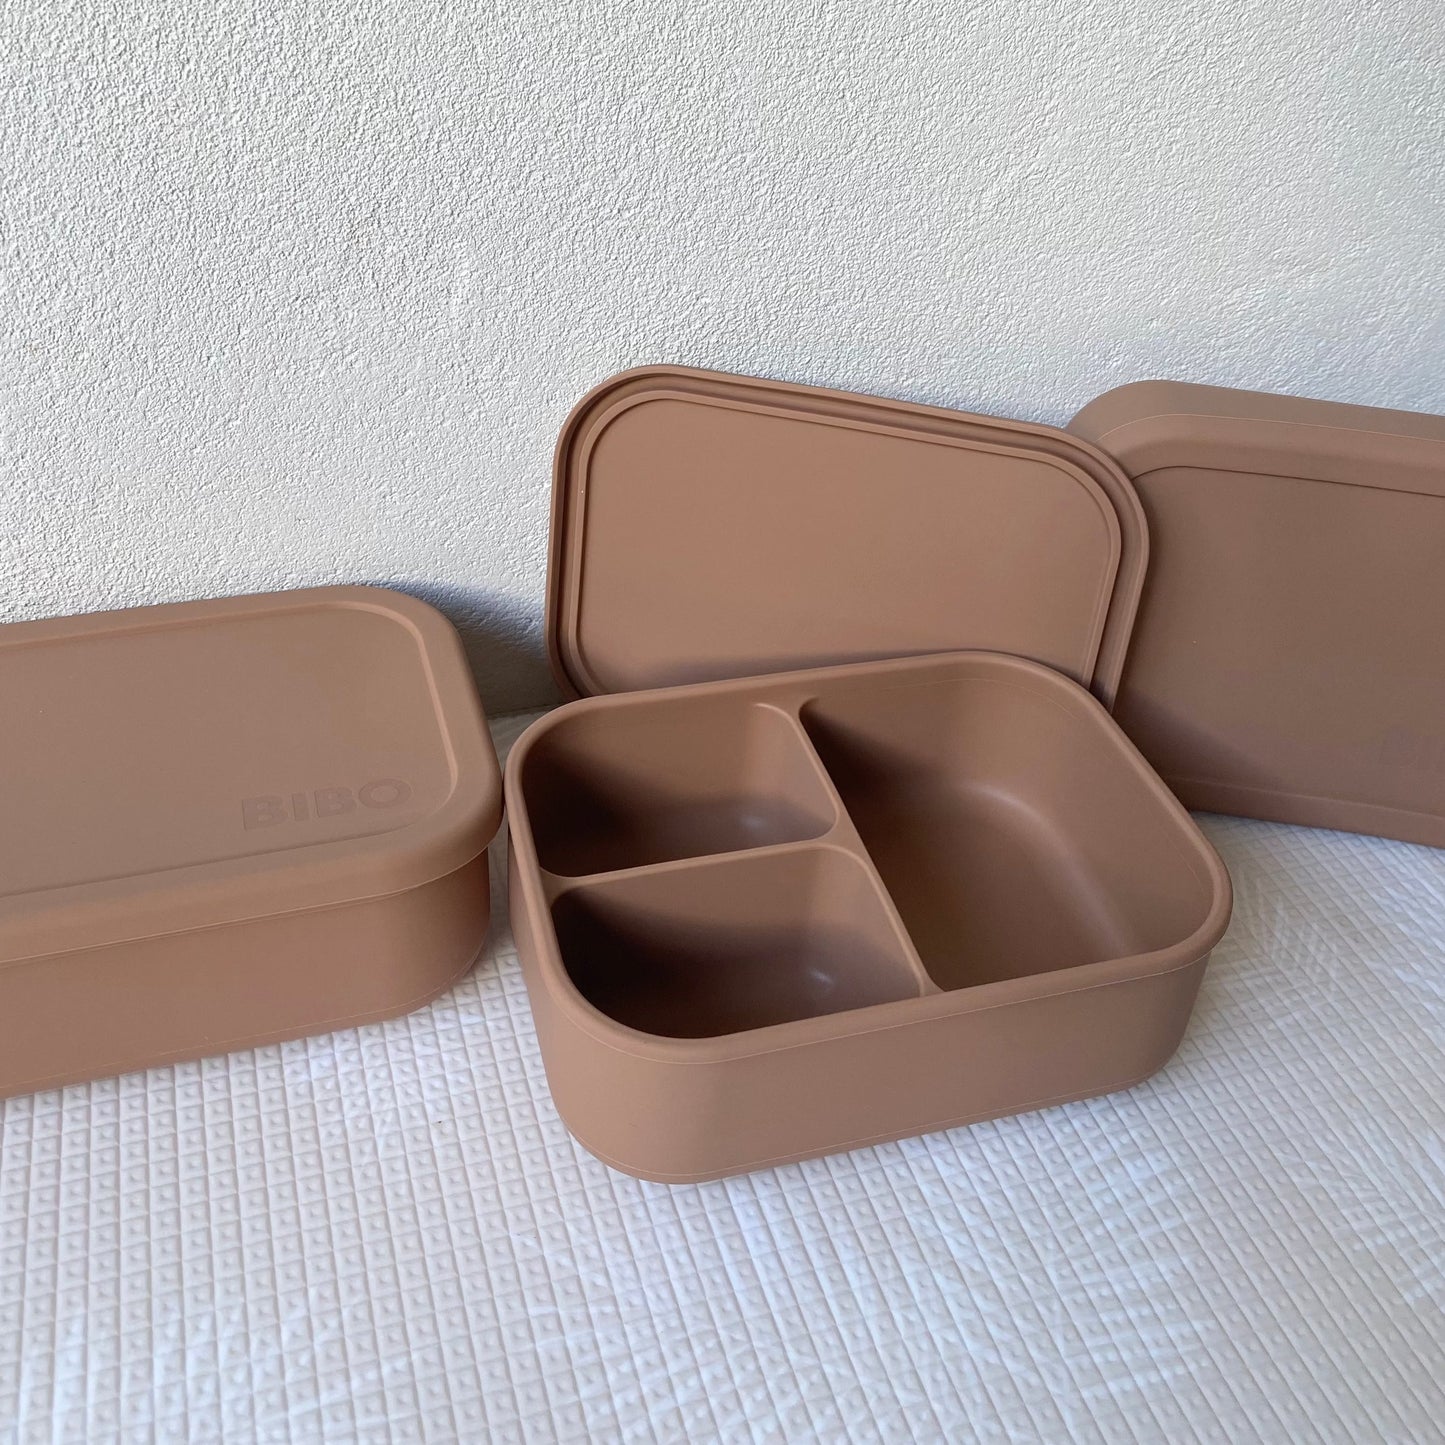 Silicone 3 Bento Lunchbox